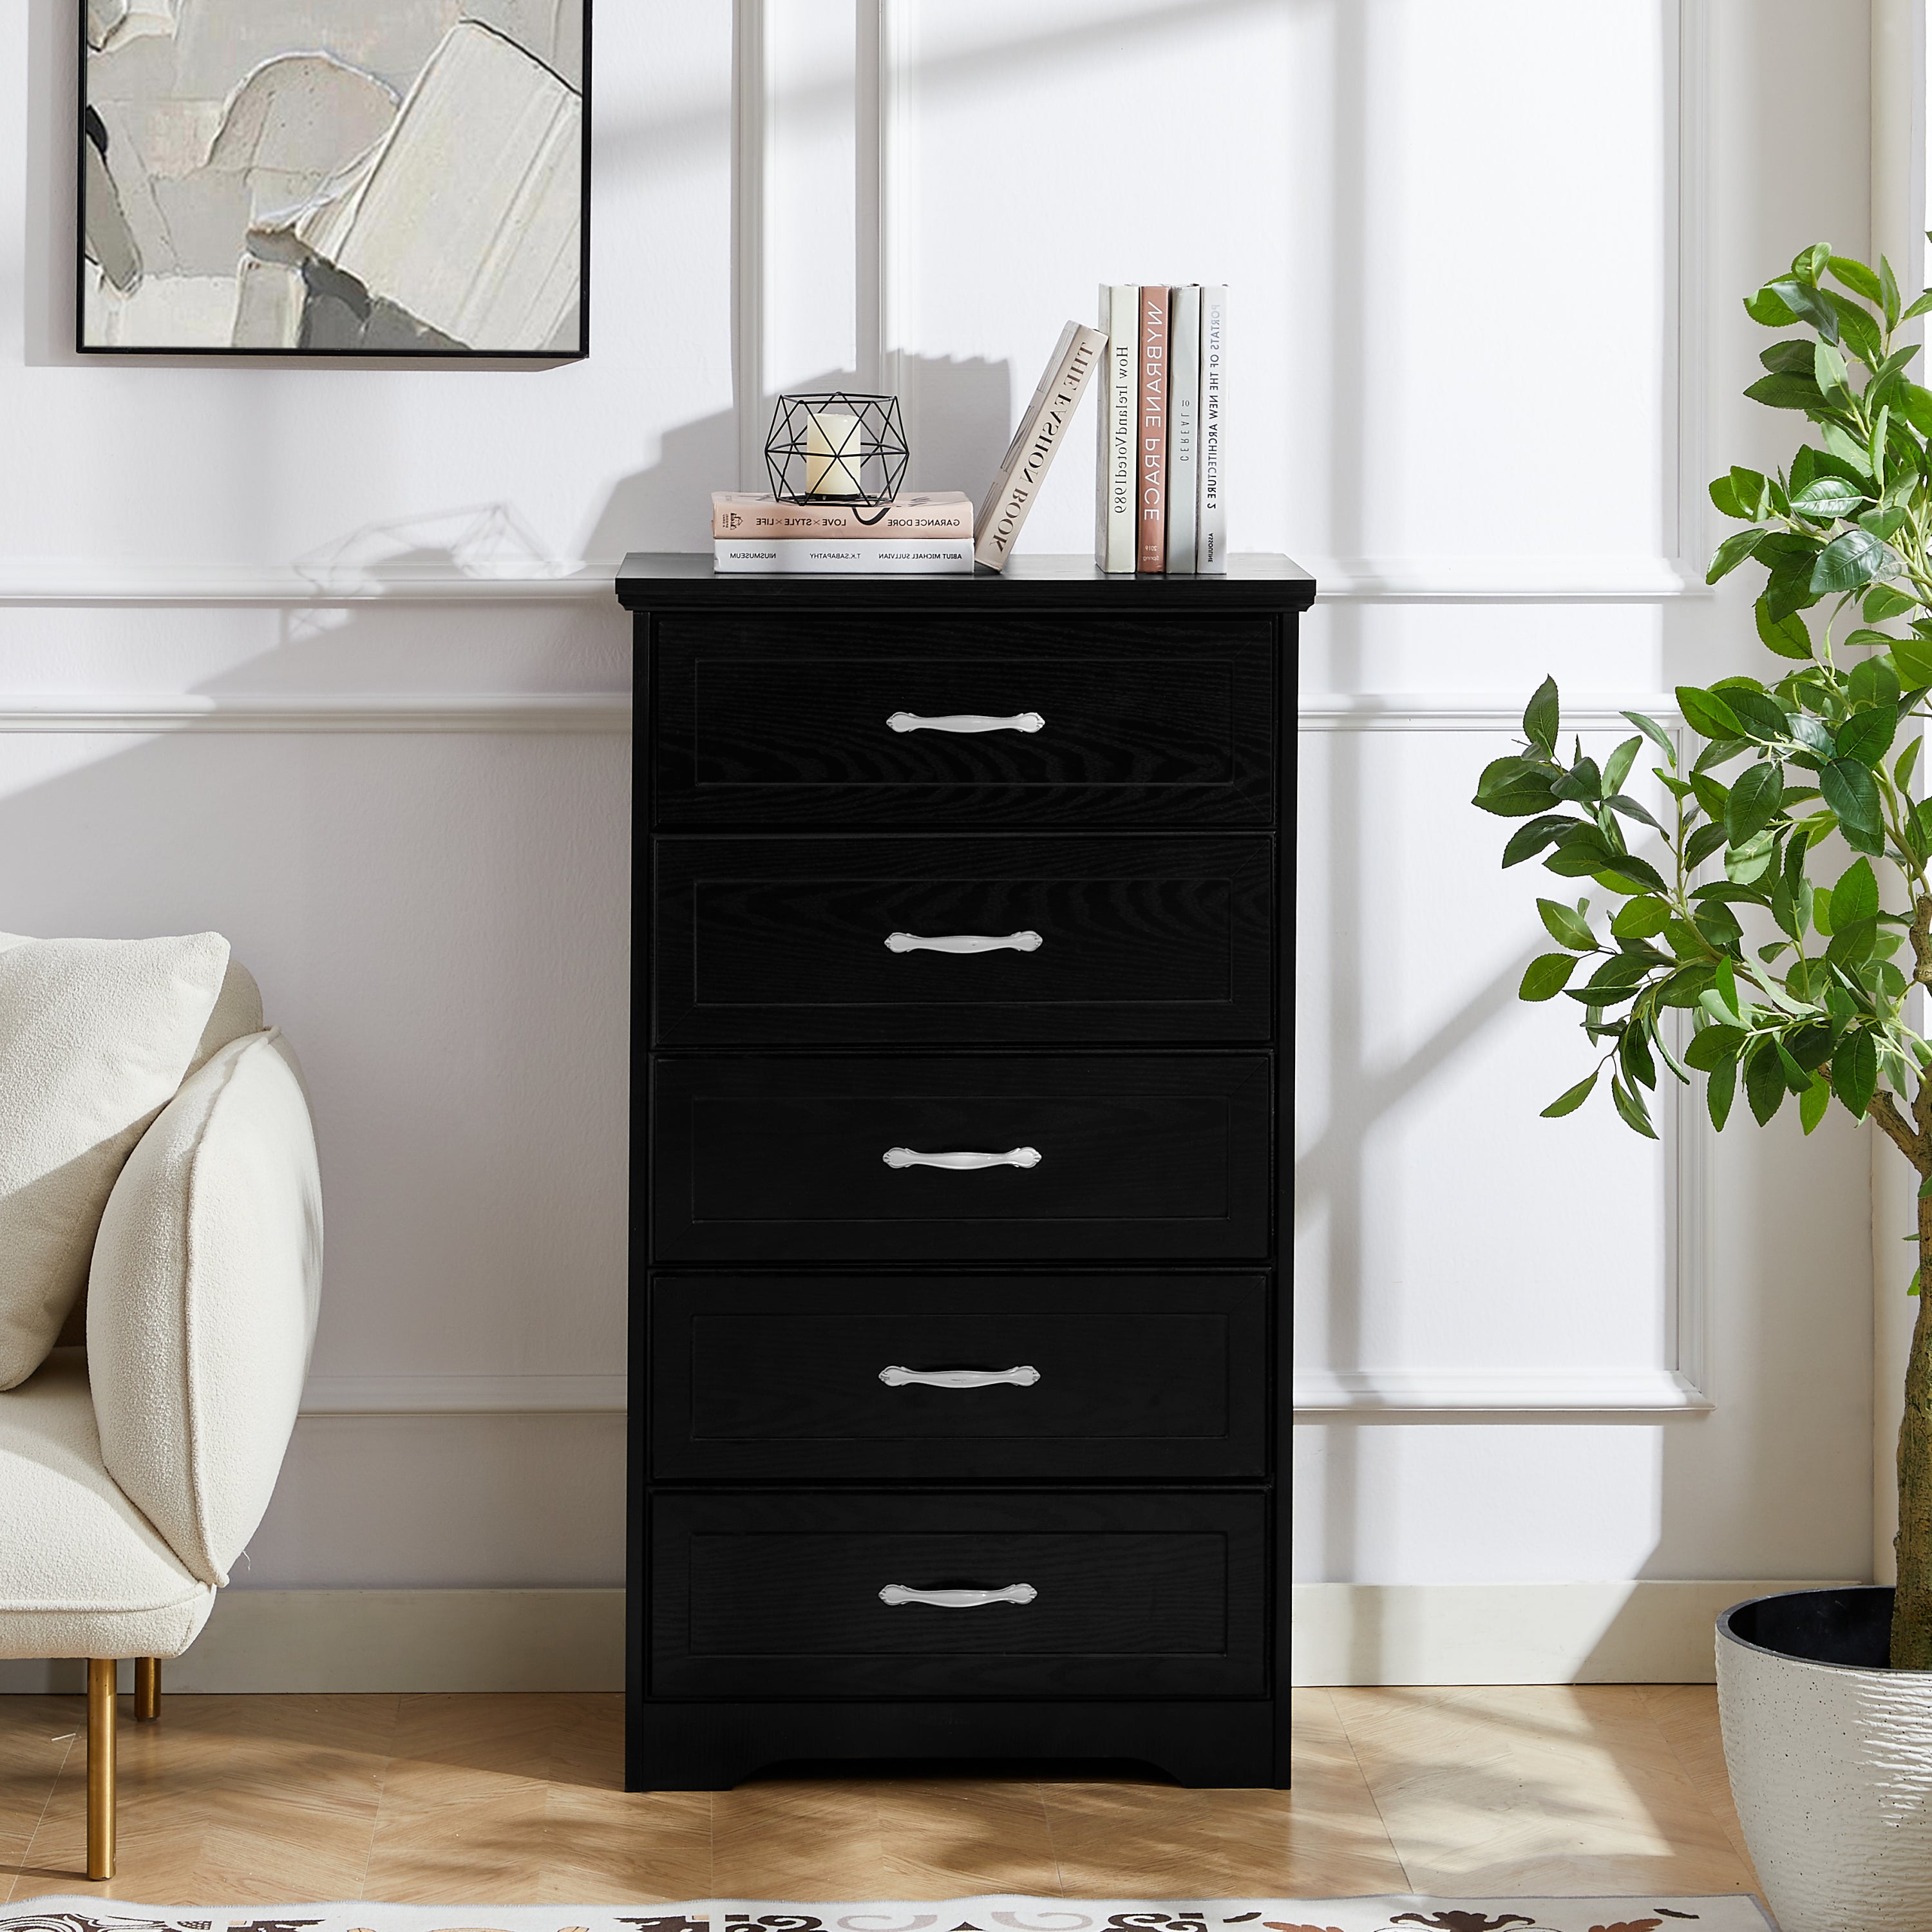 🆓🚛 Modern 5 Tier Bedroom Chest of Drawers, Dresser With Drawers, Clothes Organizer for Living Room, Bedroom, Hallway, Black, 25.2″L X 15.8″W X 43.5″H